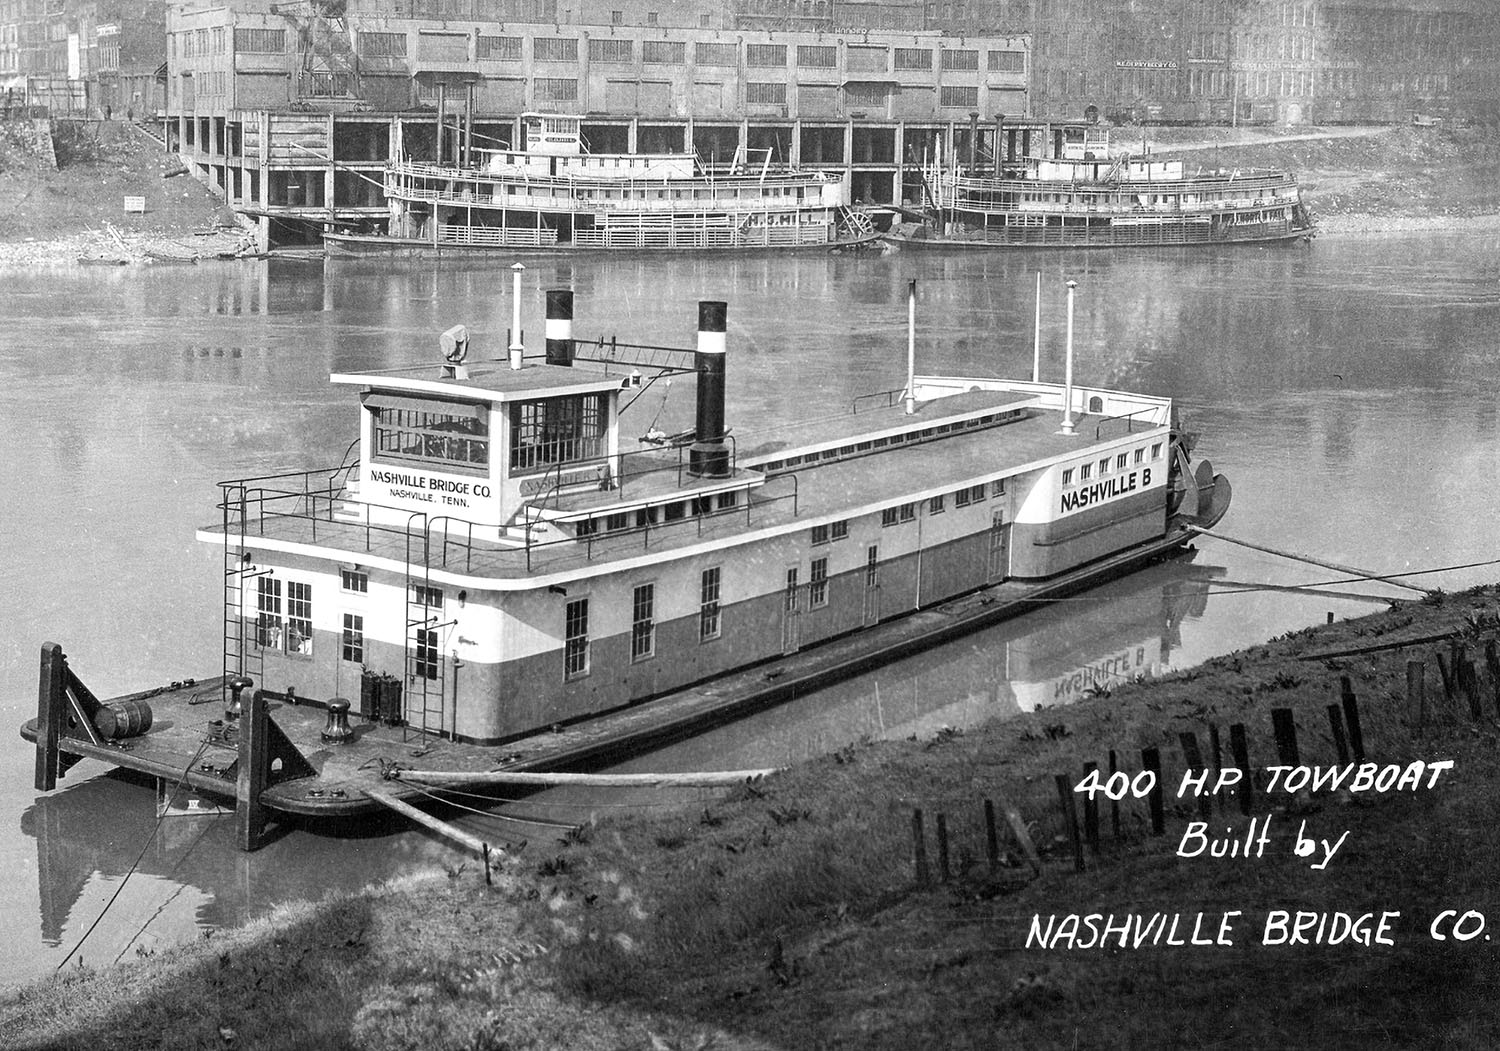 The Nashville B Saw A Lot Of River Territory